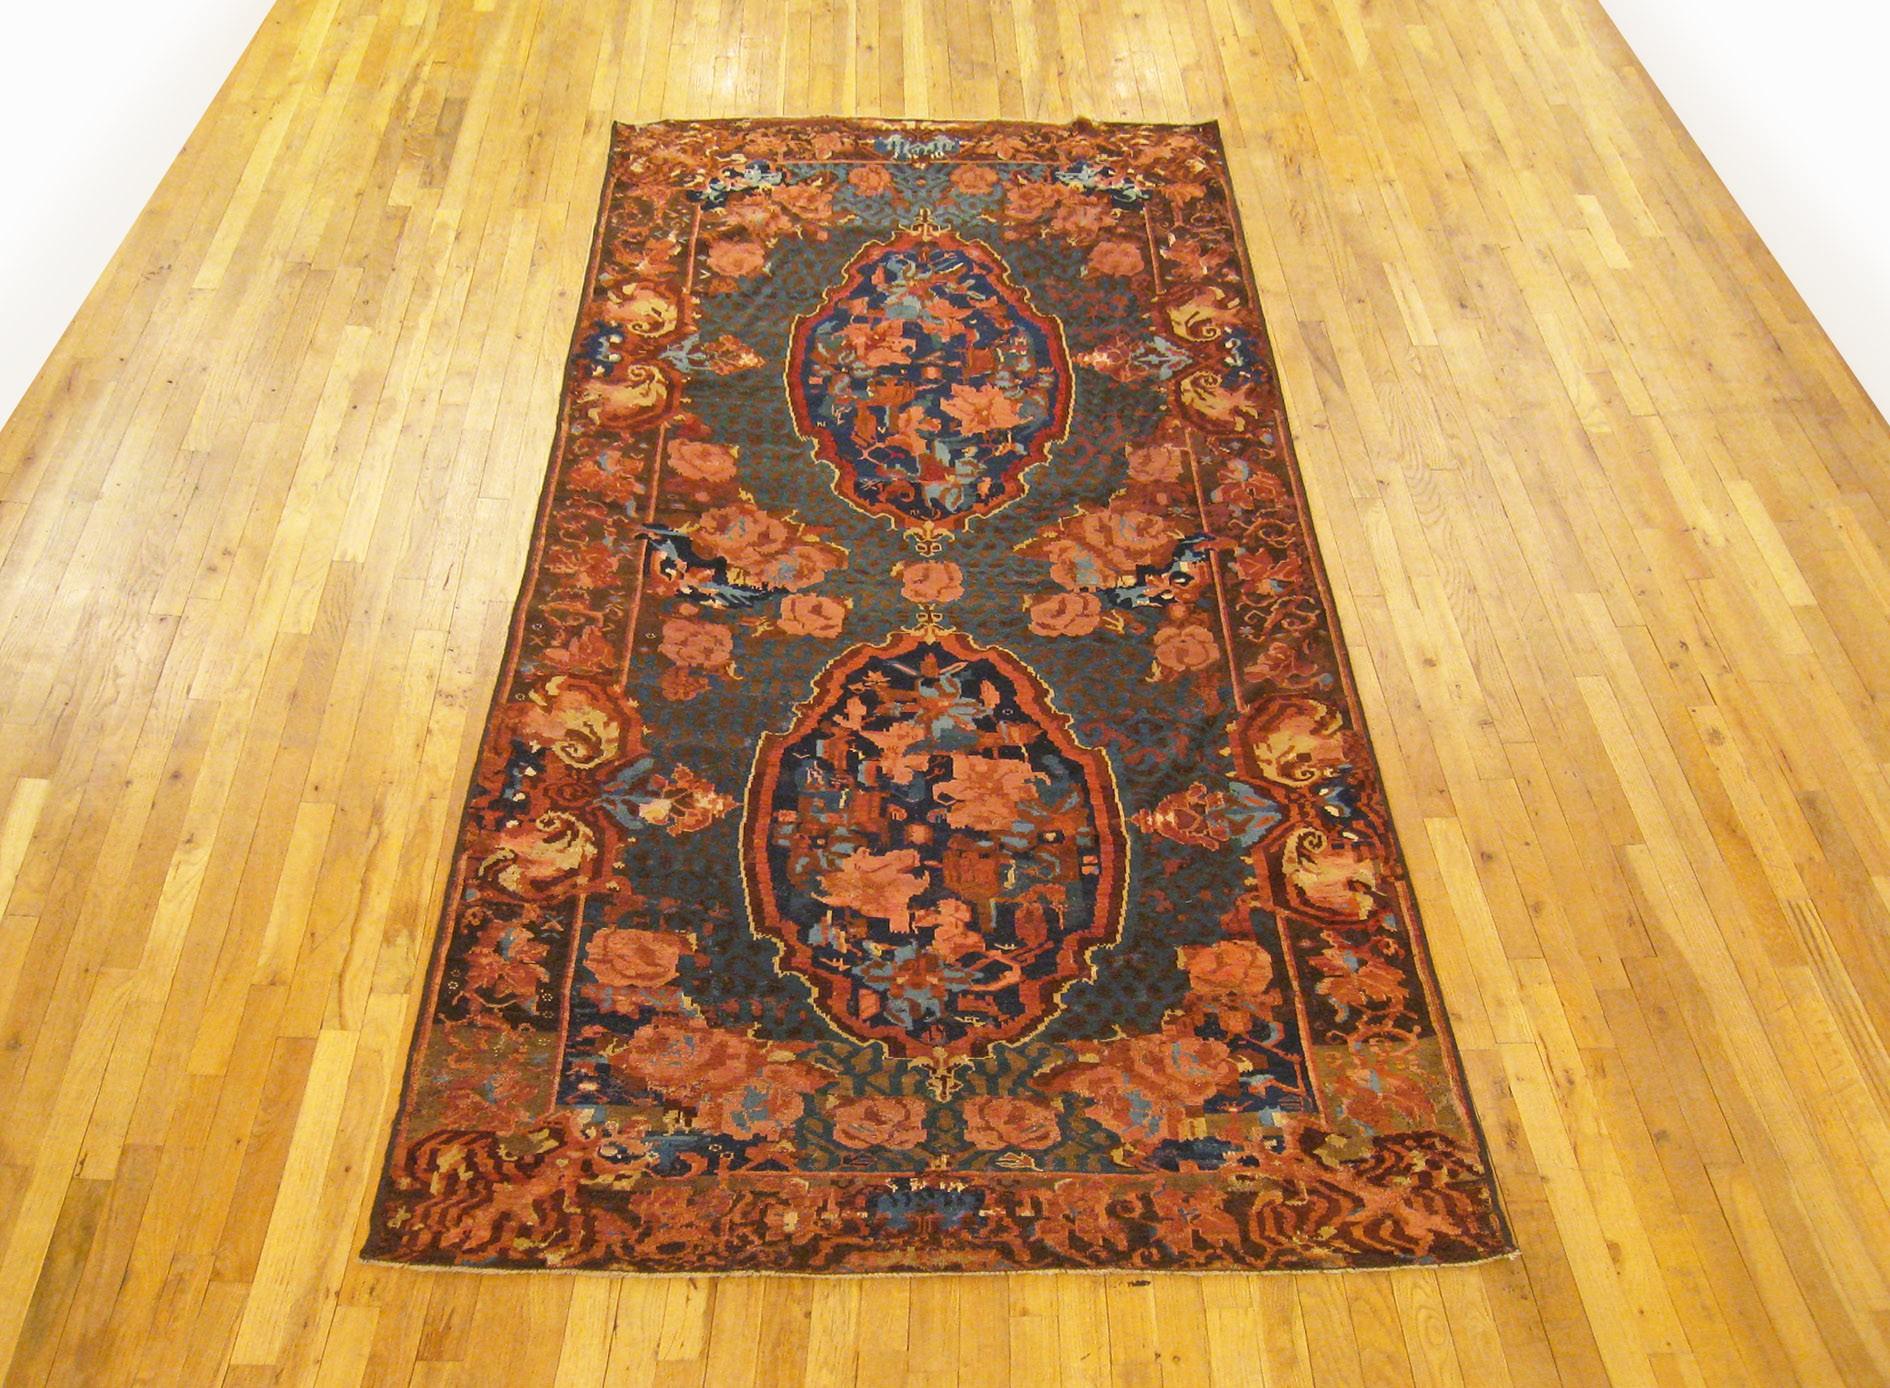 Antique Caucasian Karabagh Rug, Gallery size, circa 1870.

A one-of-a-kind antique Caucasian Karabagh Carpet, hand-knotted with soft wool pile. This lovely hand-knotted carpet features multiple medallions with a Gul Farang design on the blue